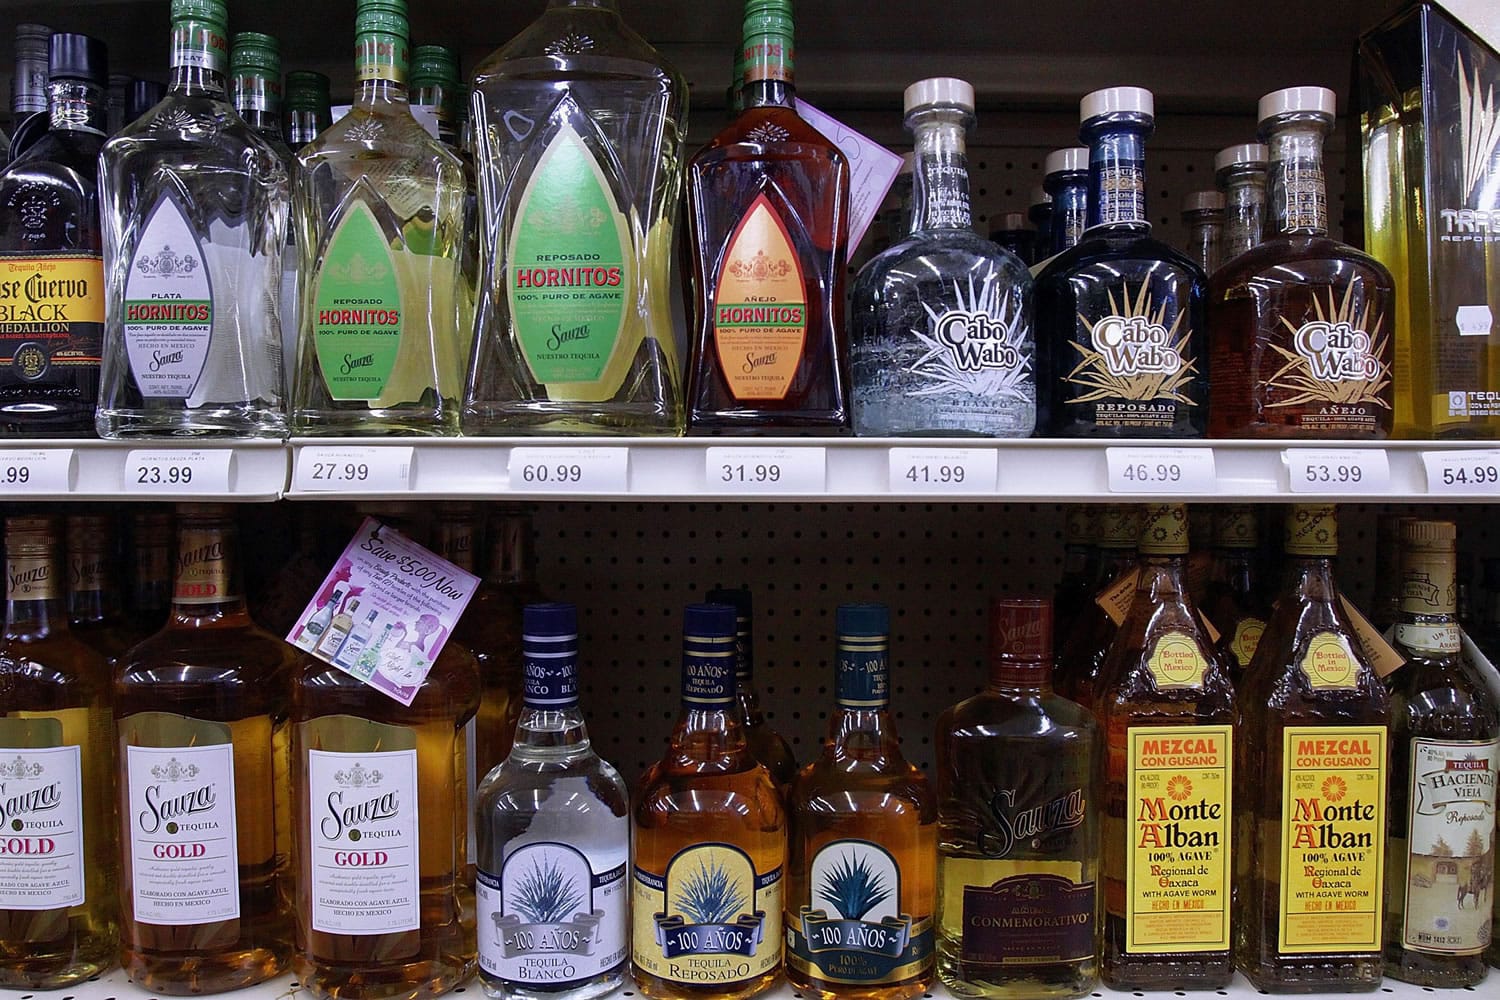 Testimony was mixed on Tuesday, April 3, during a Washington State Liquor Control Board hearing in Vancouver about whether businesses should be allowed to sell alcohol after 2 a.m., an idea the board is considering at the request of the city of Seattle.